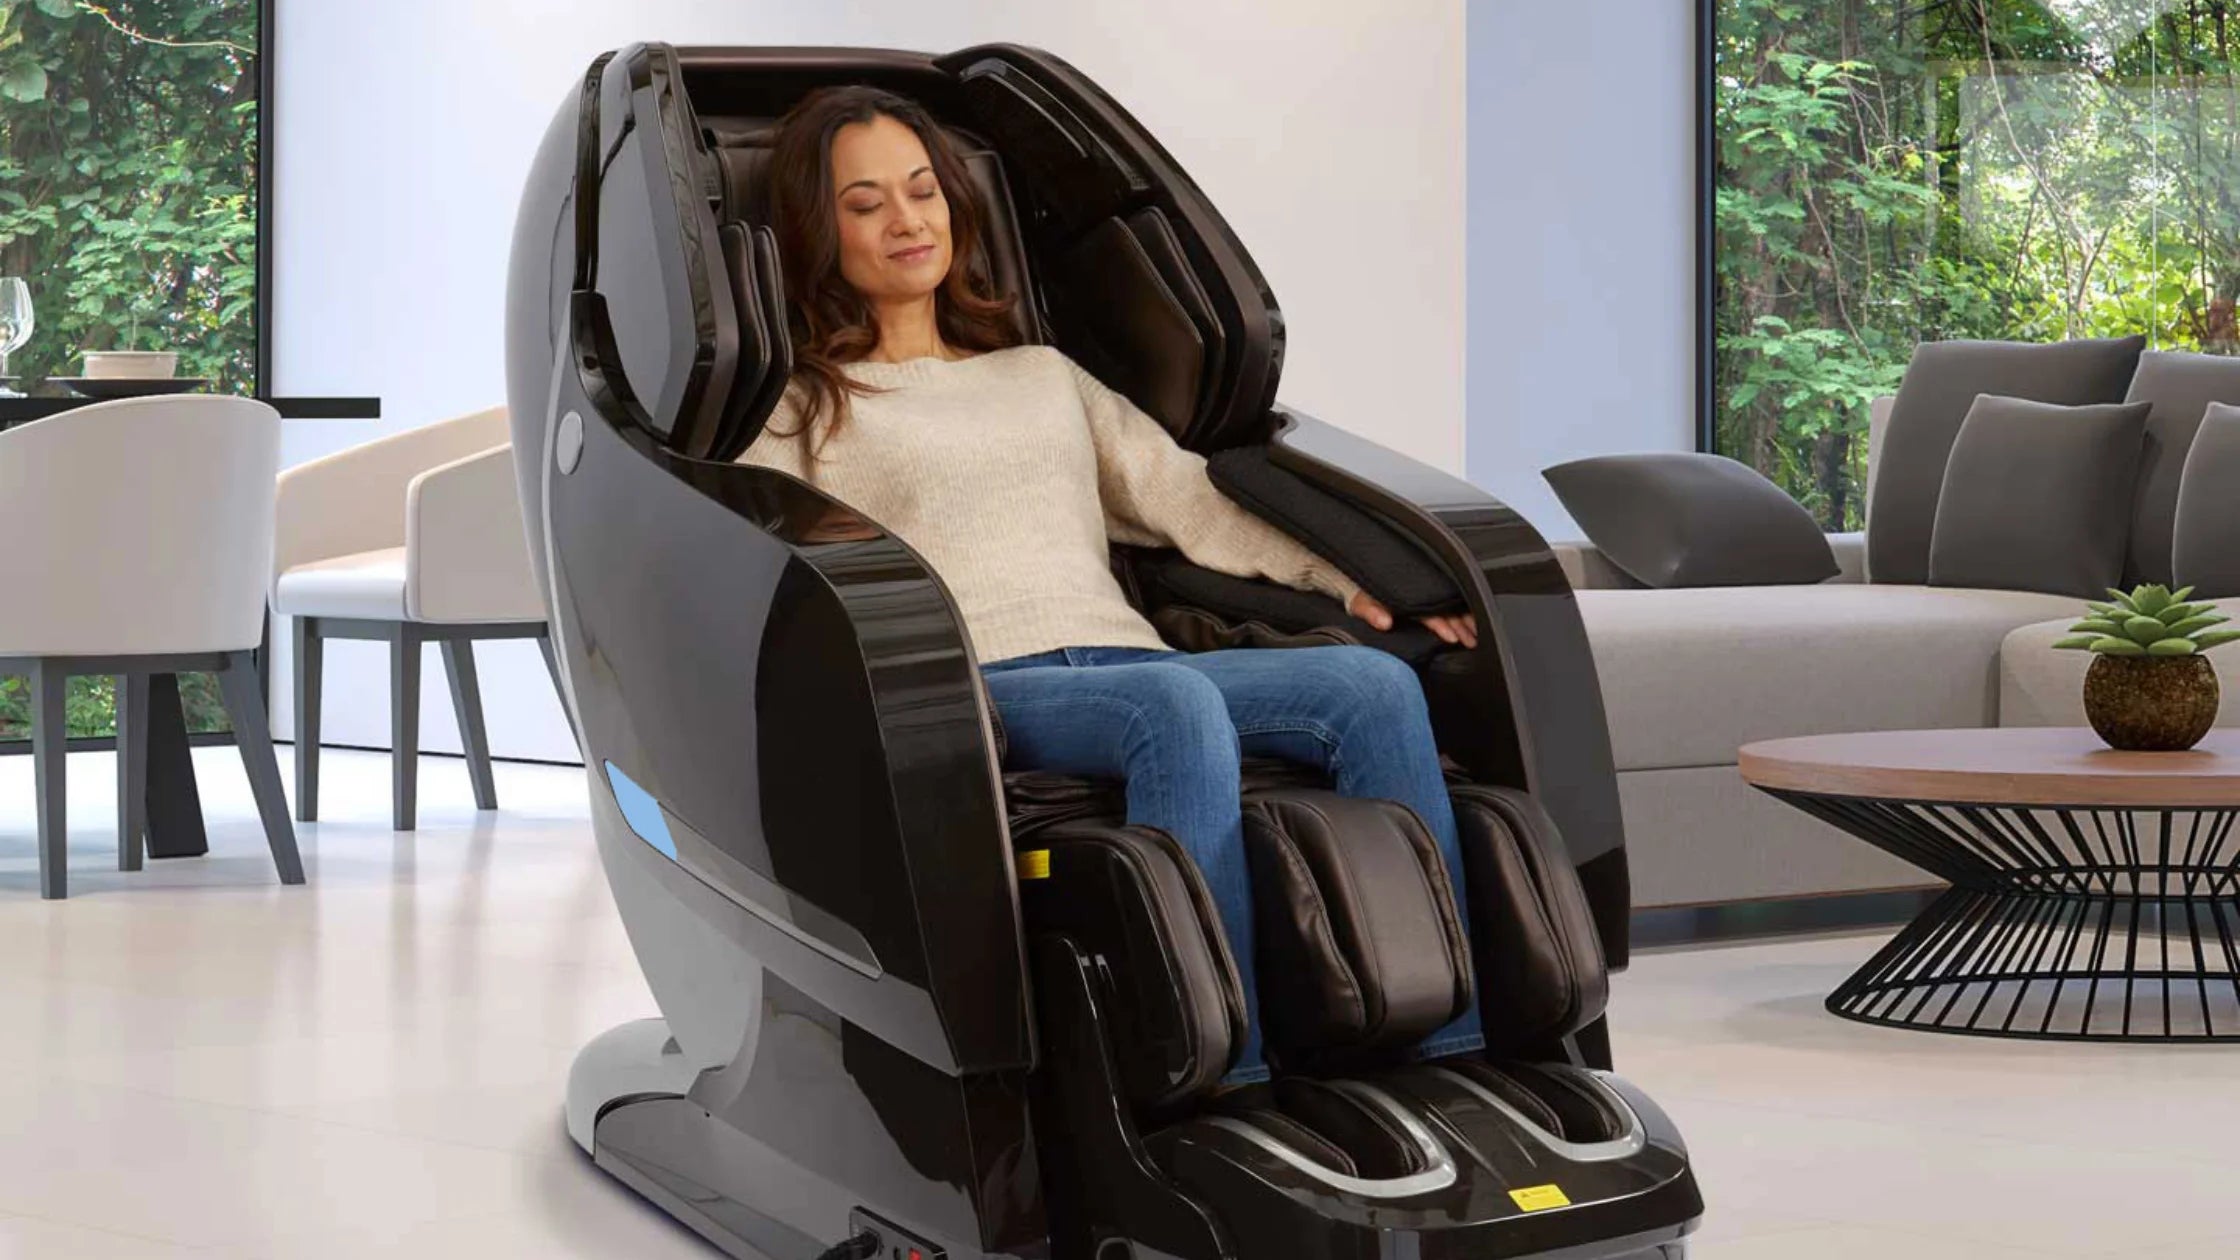 Airbag Massage Chairs: Here's What You Should Know